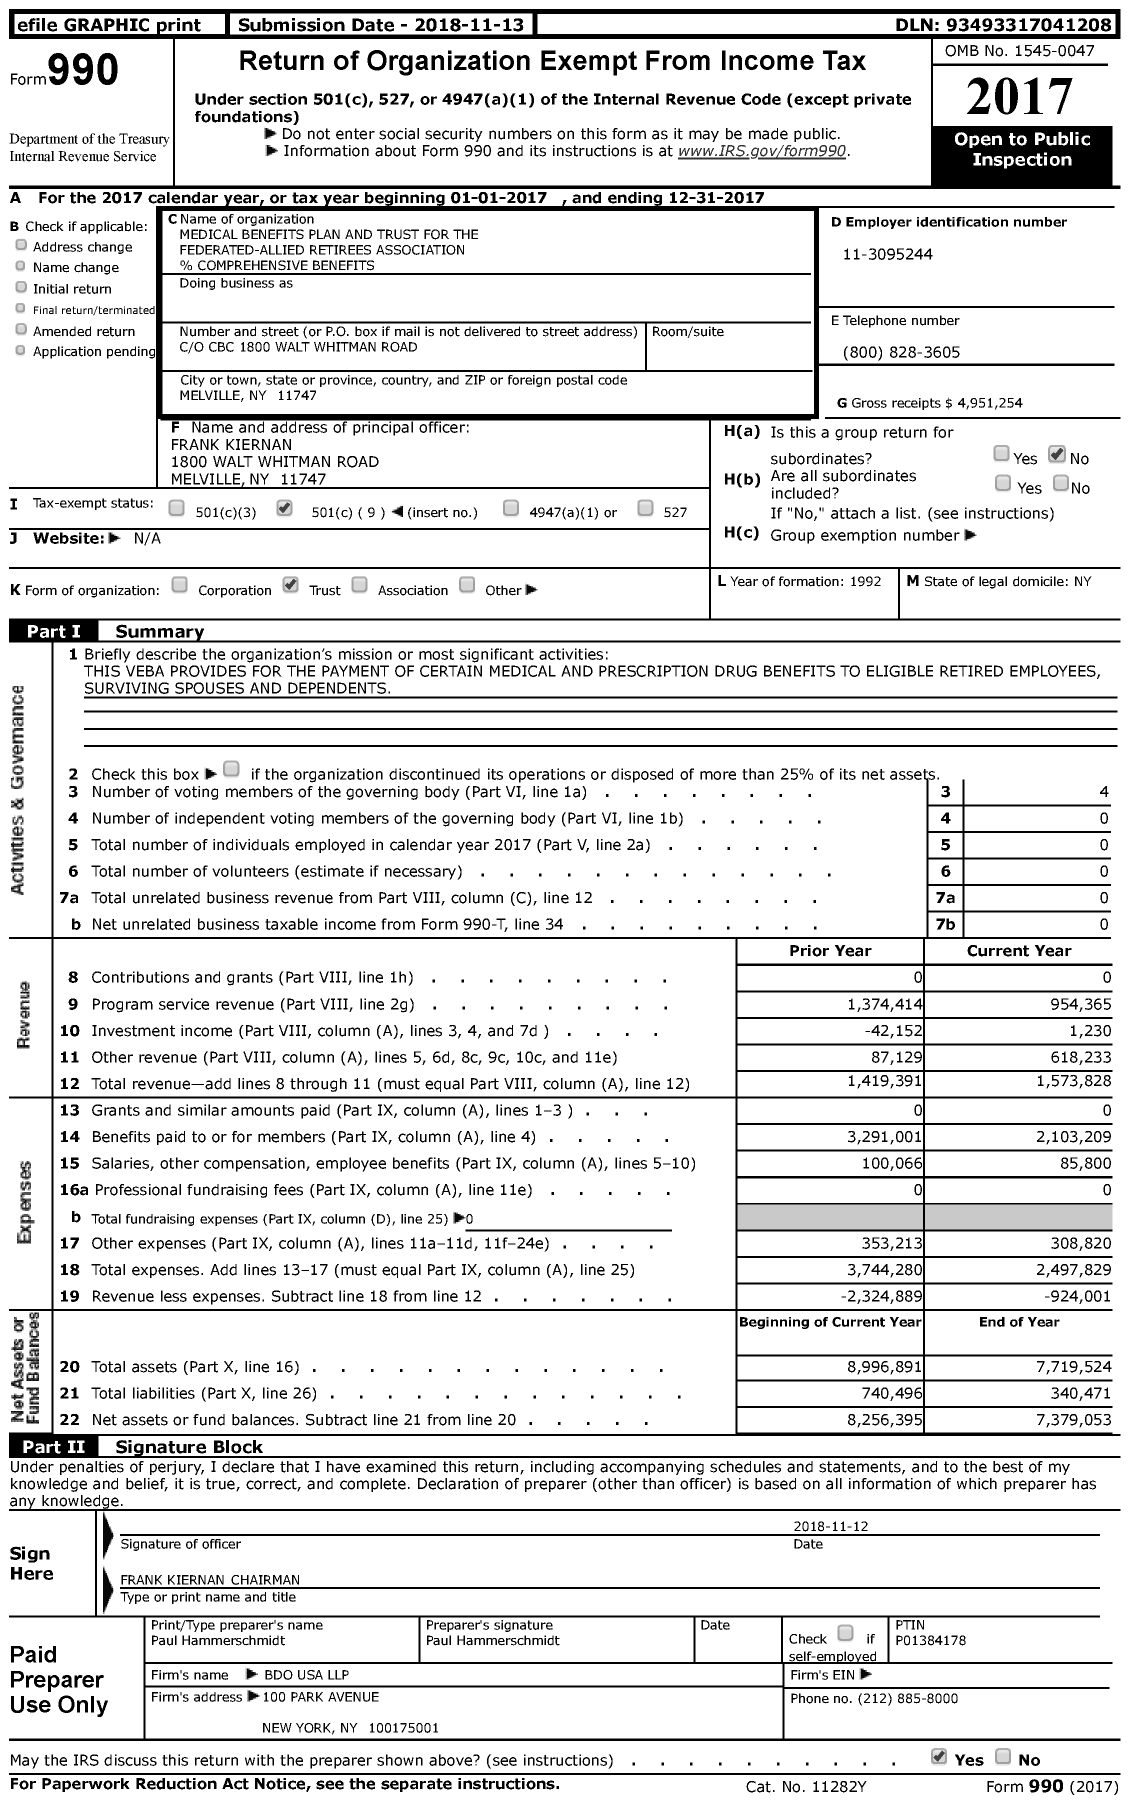 Image of first page of 2017 Form 990 for Medical Benefits Plan and Trust for the Federated-Allied Retirees Association